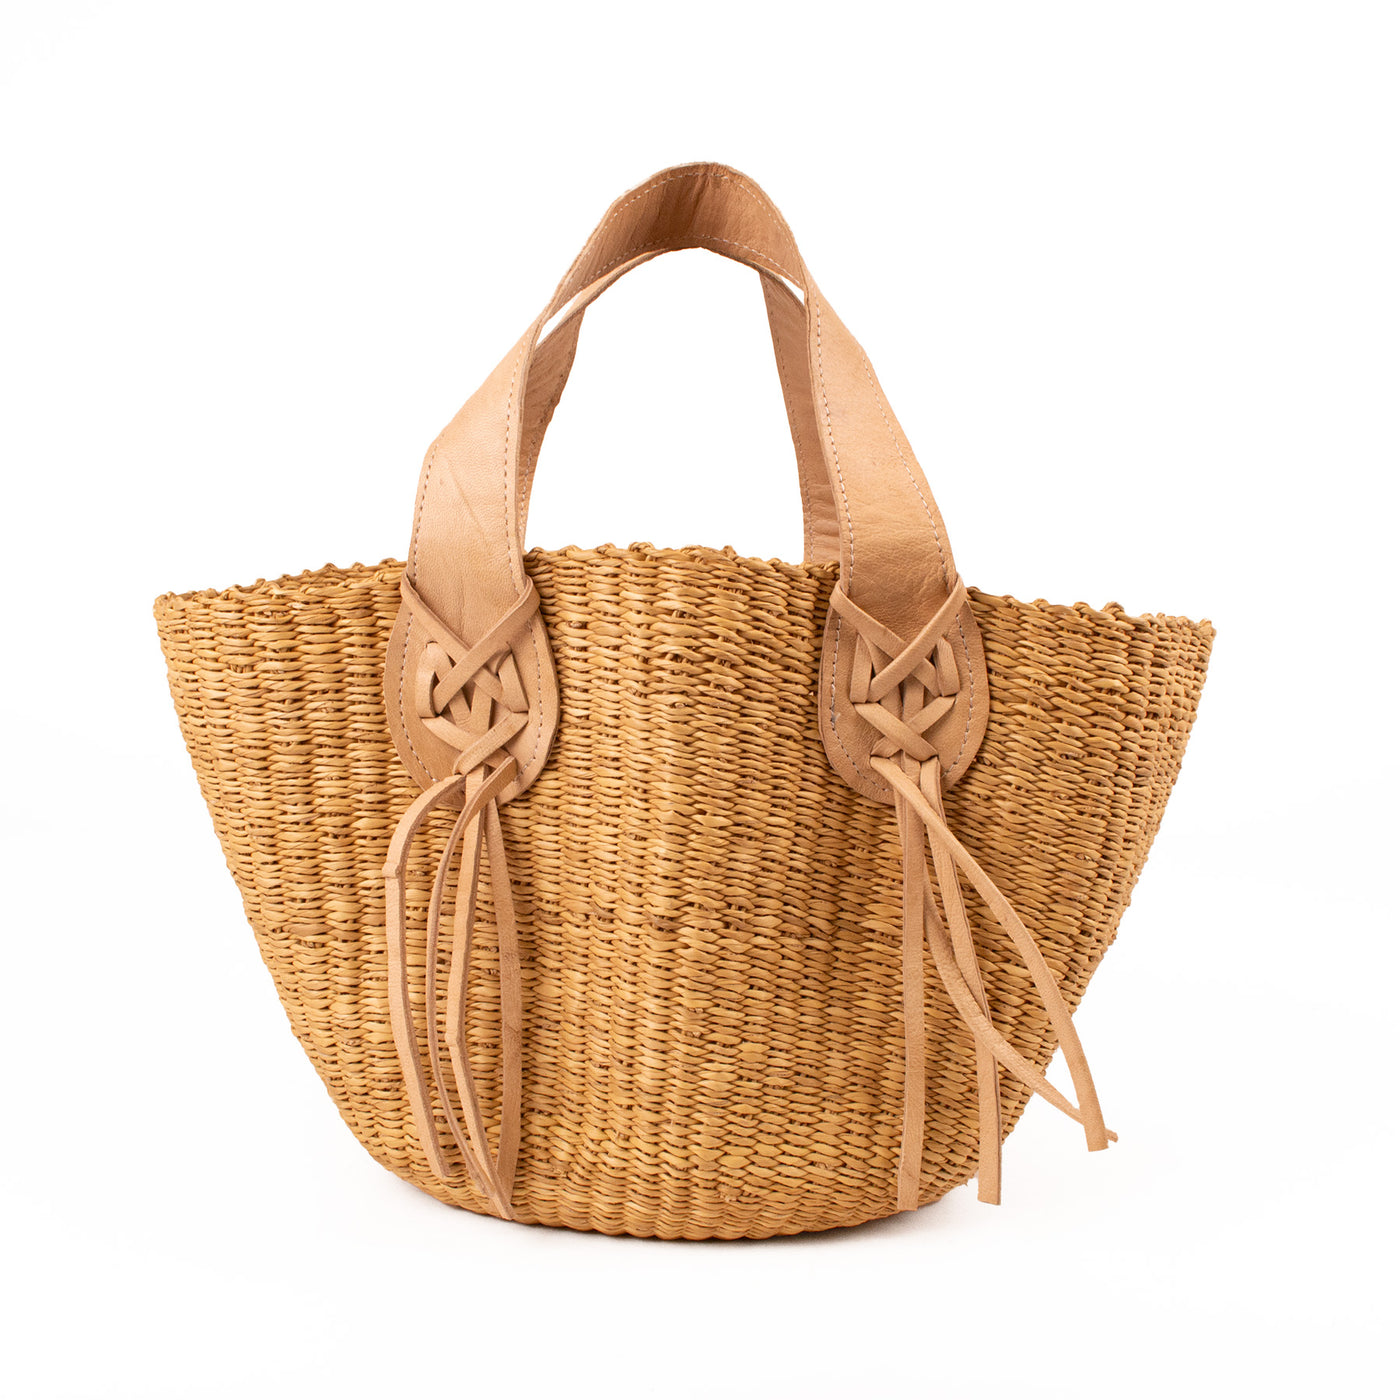 Neutral Handbag - Wavy Natural with Fringed Leather Handles